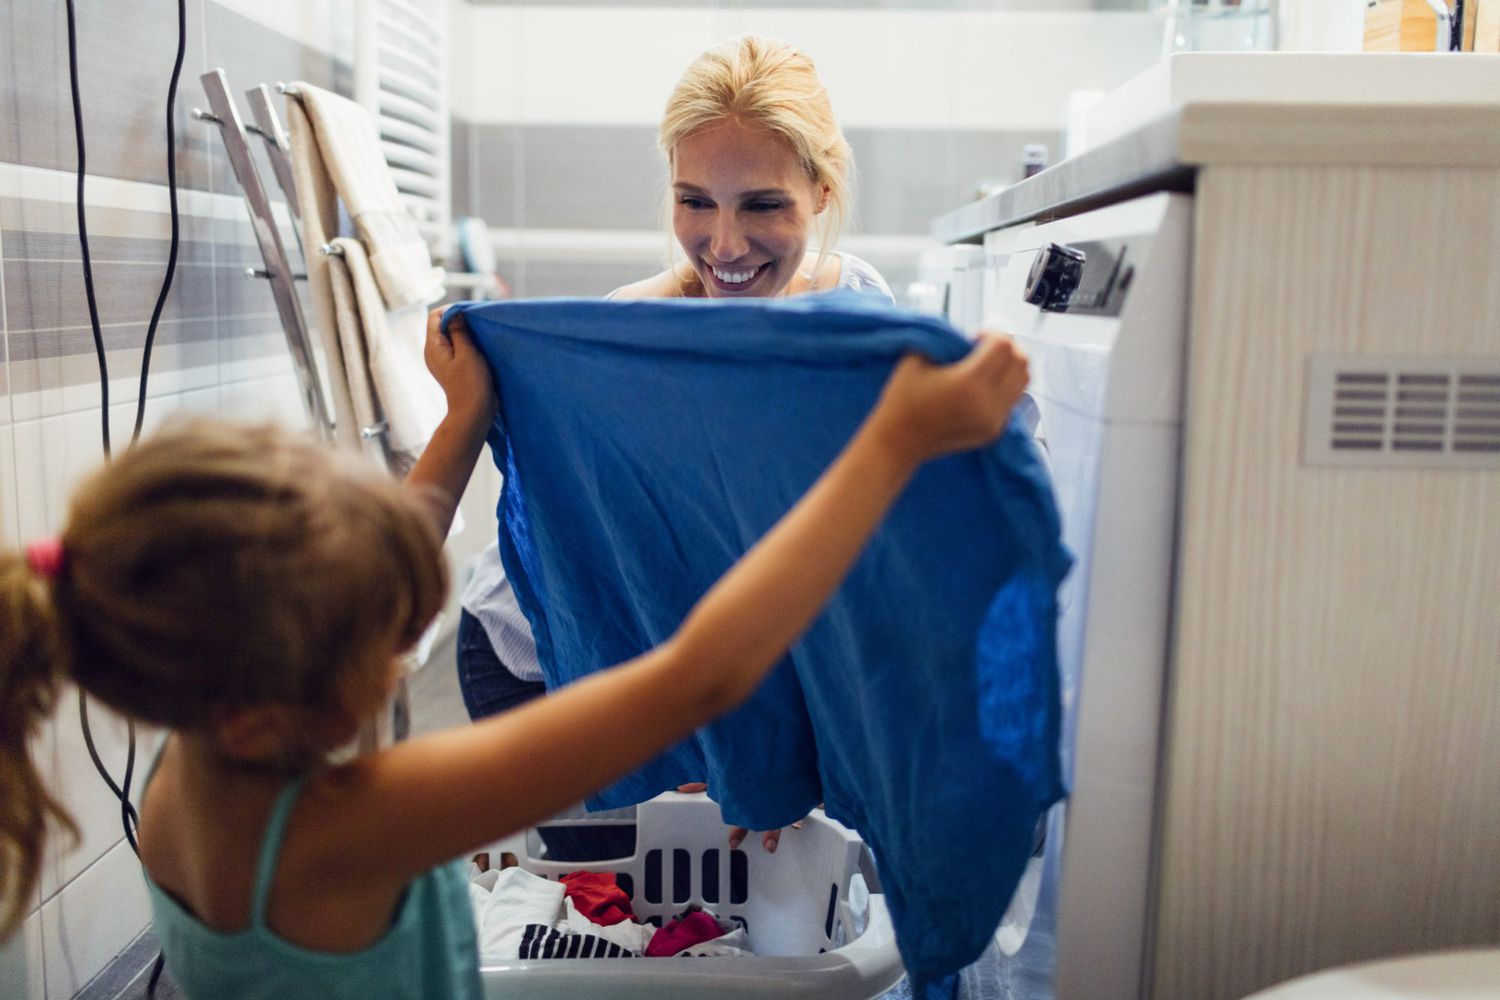 An image of a mother and daughter doing laundry.